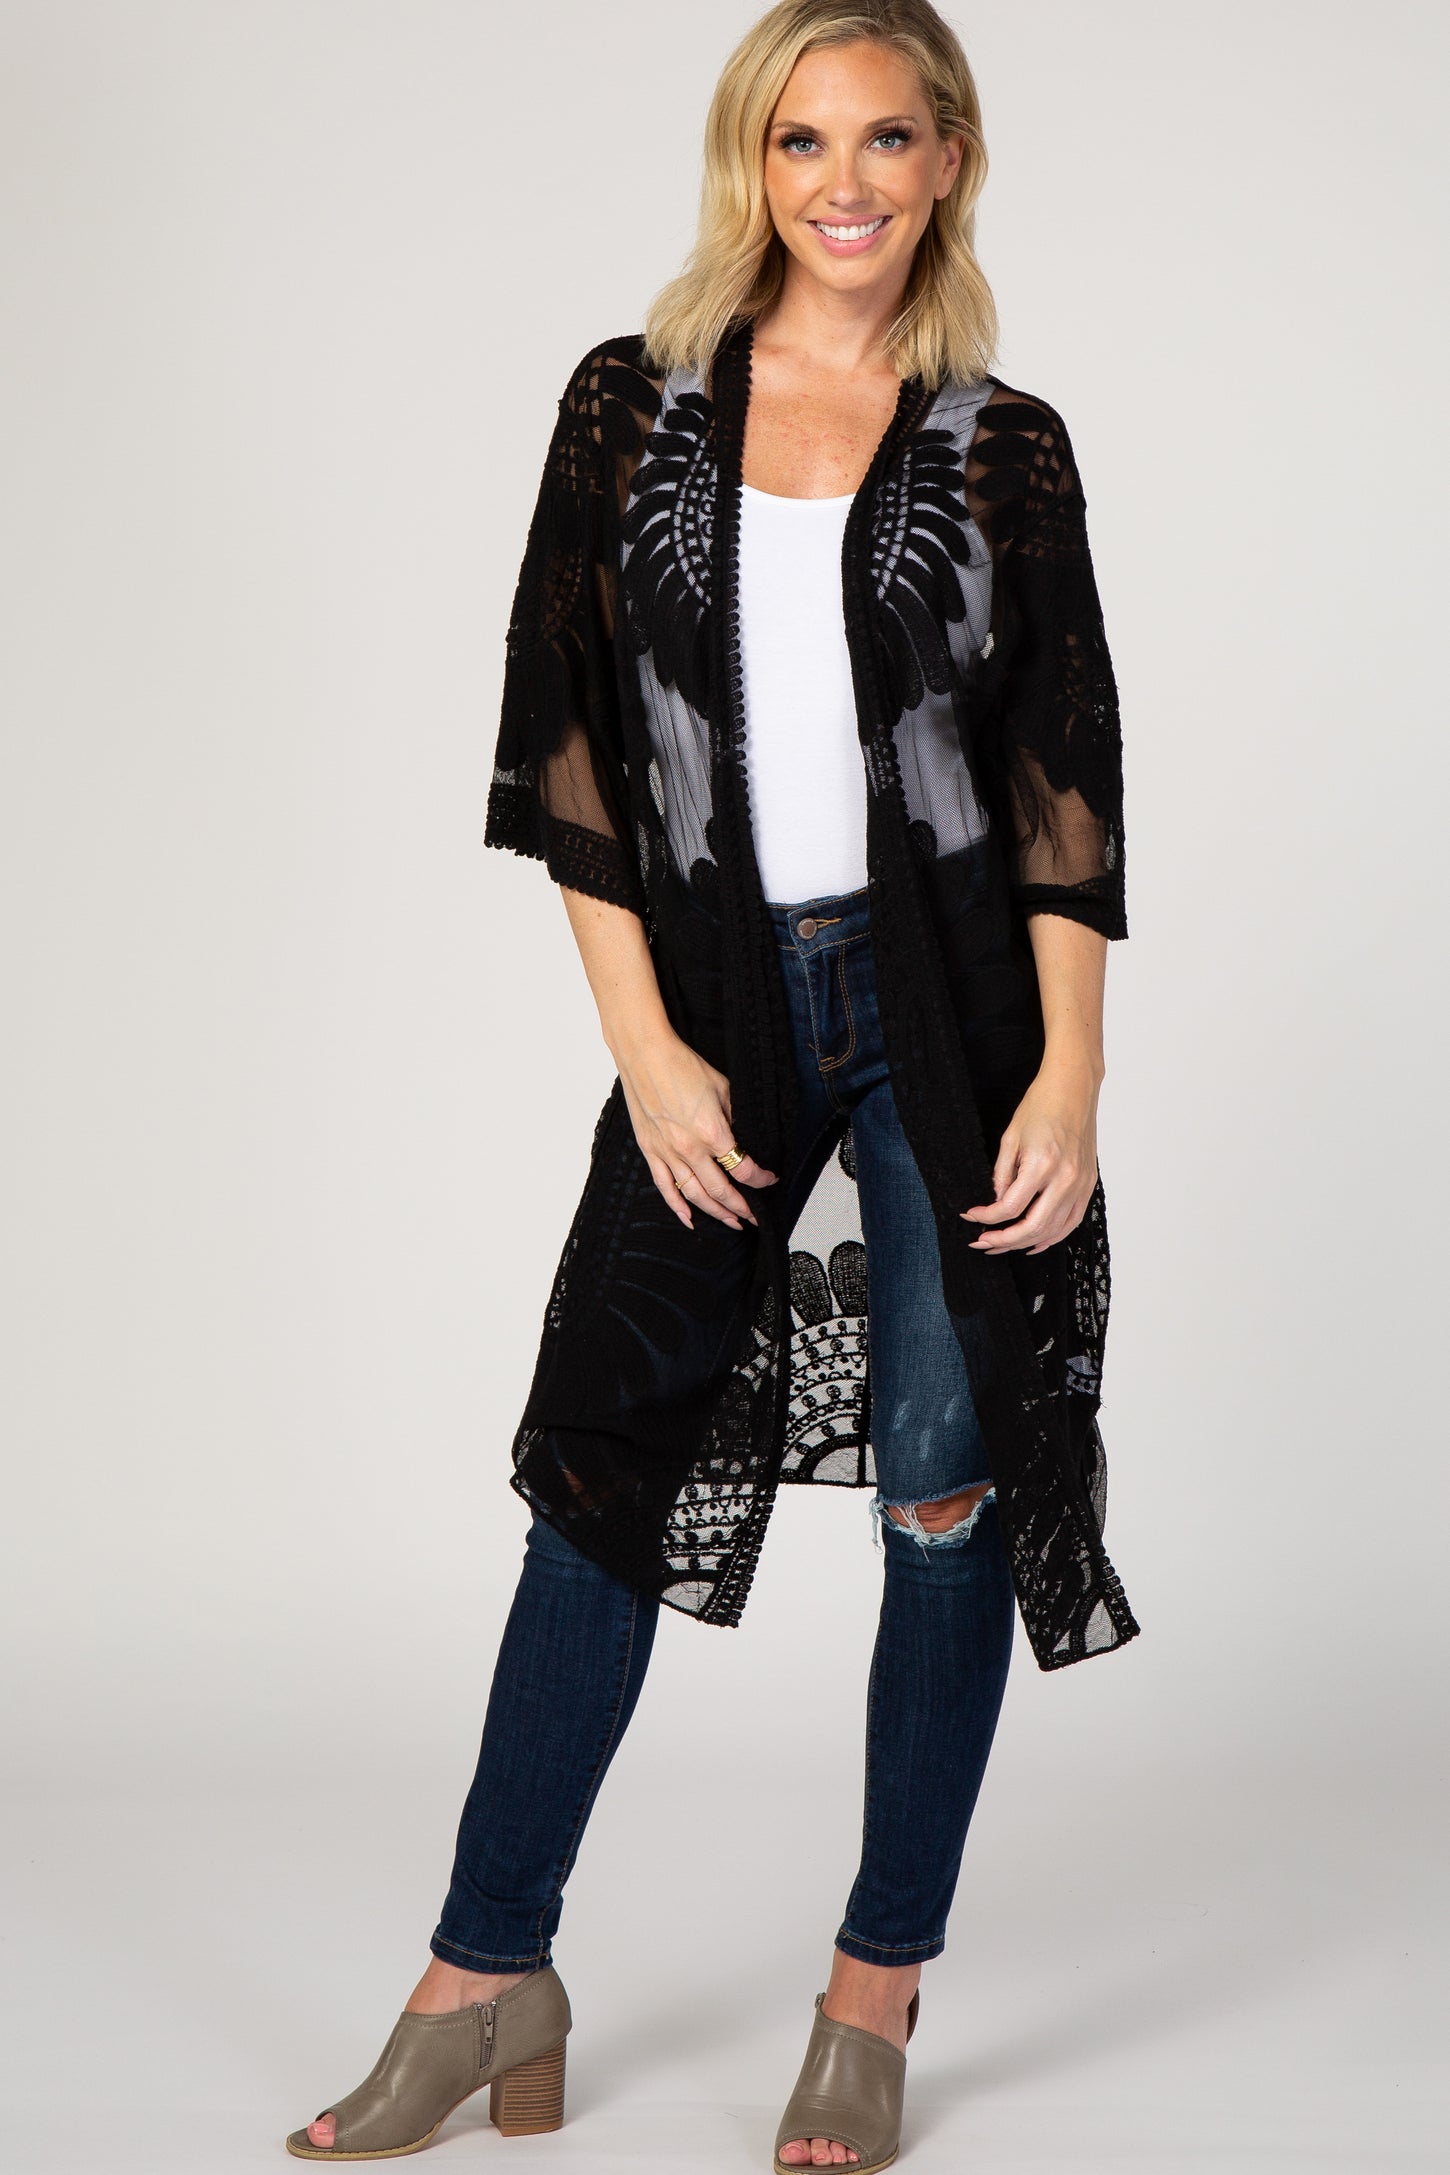 Black Lace Mesh 3/4 Sleeve Cover Up